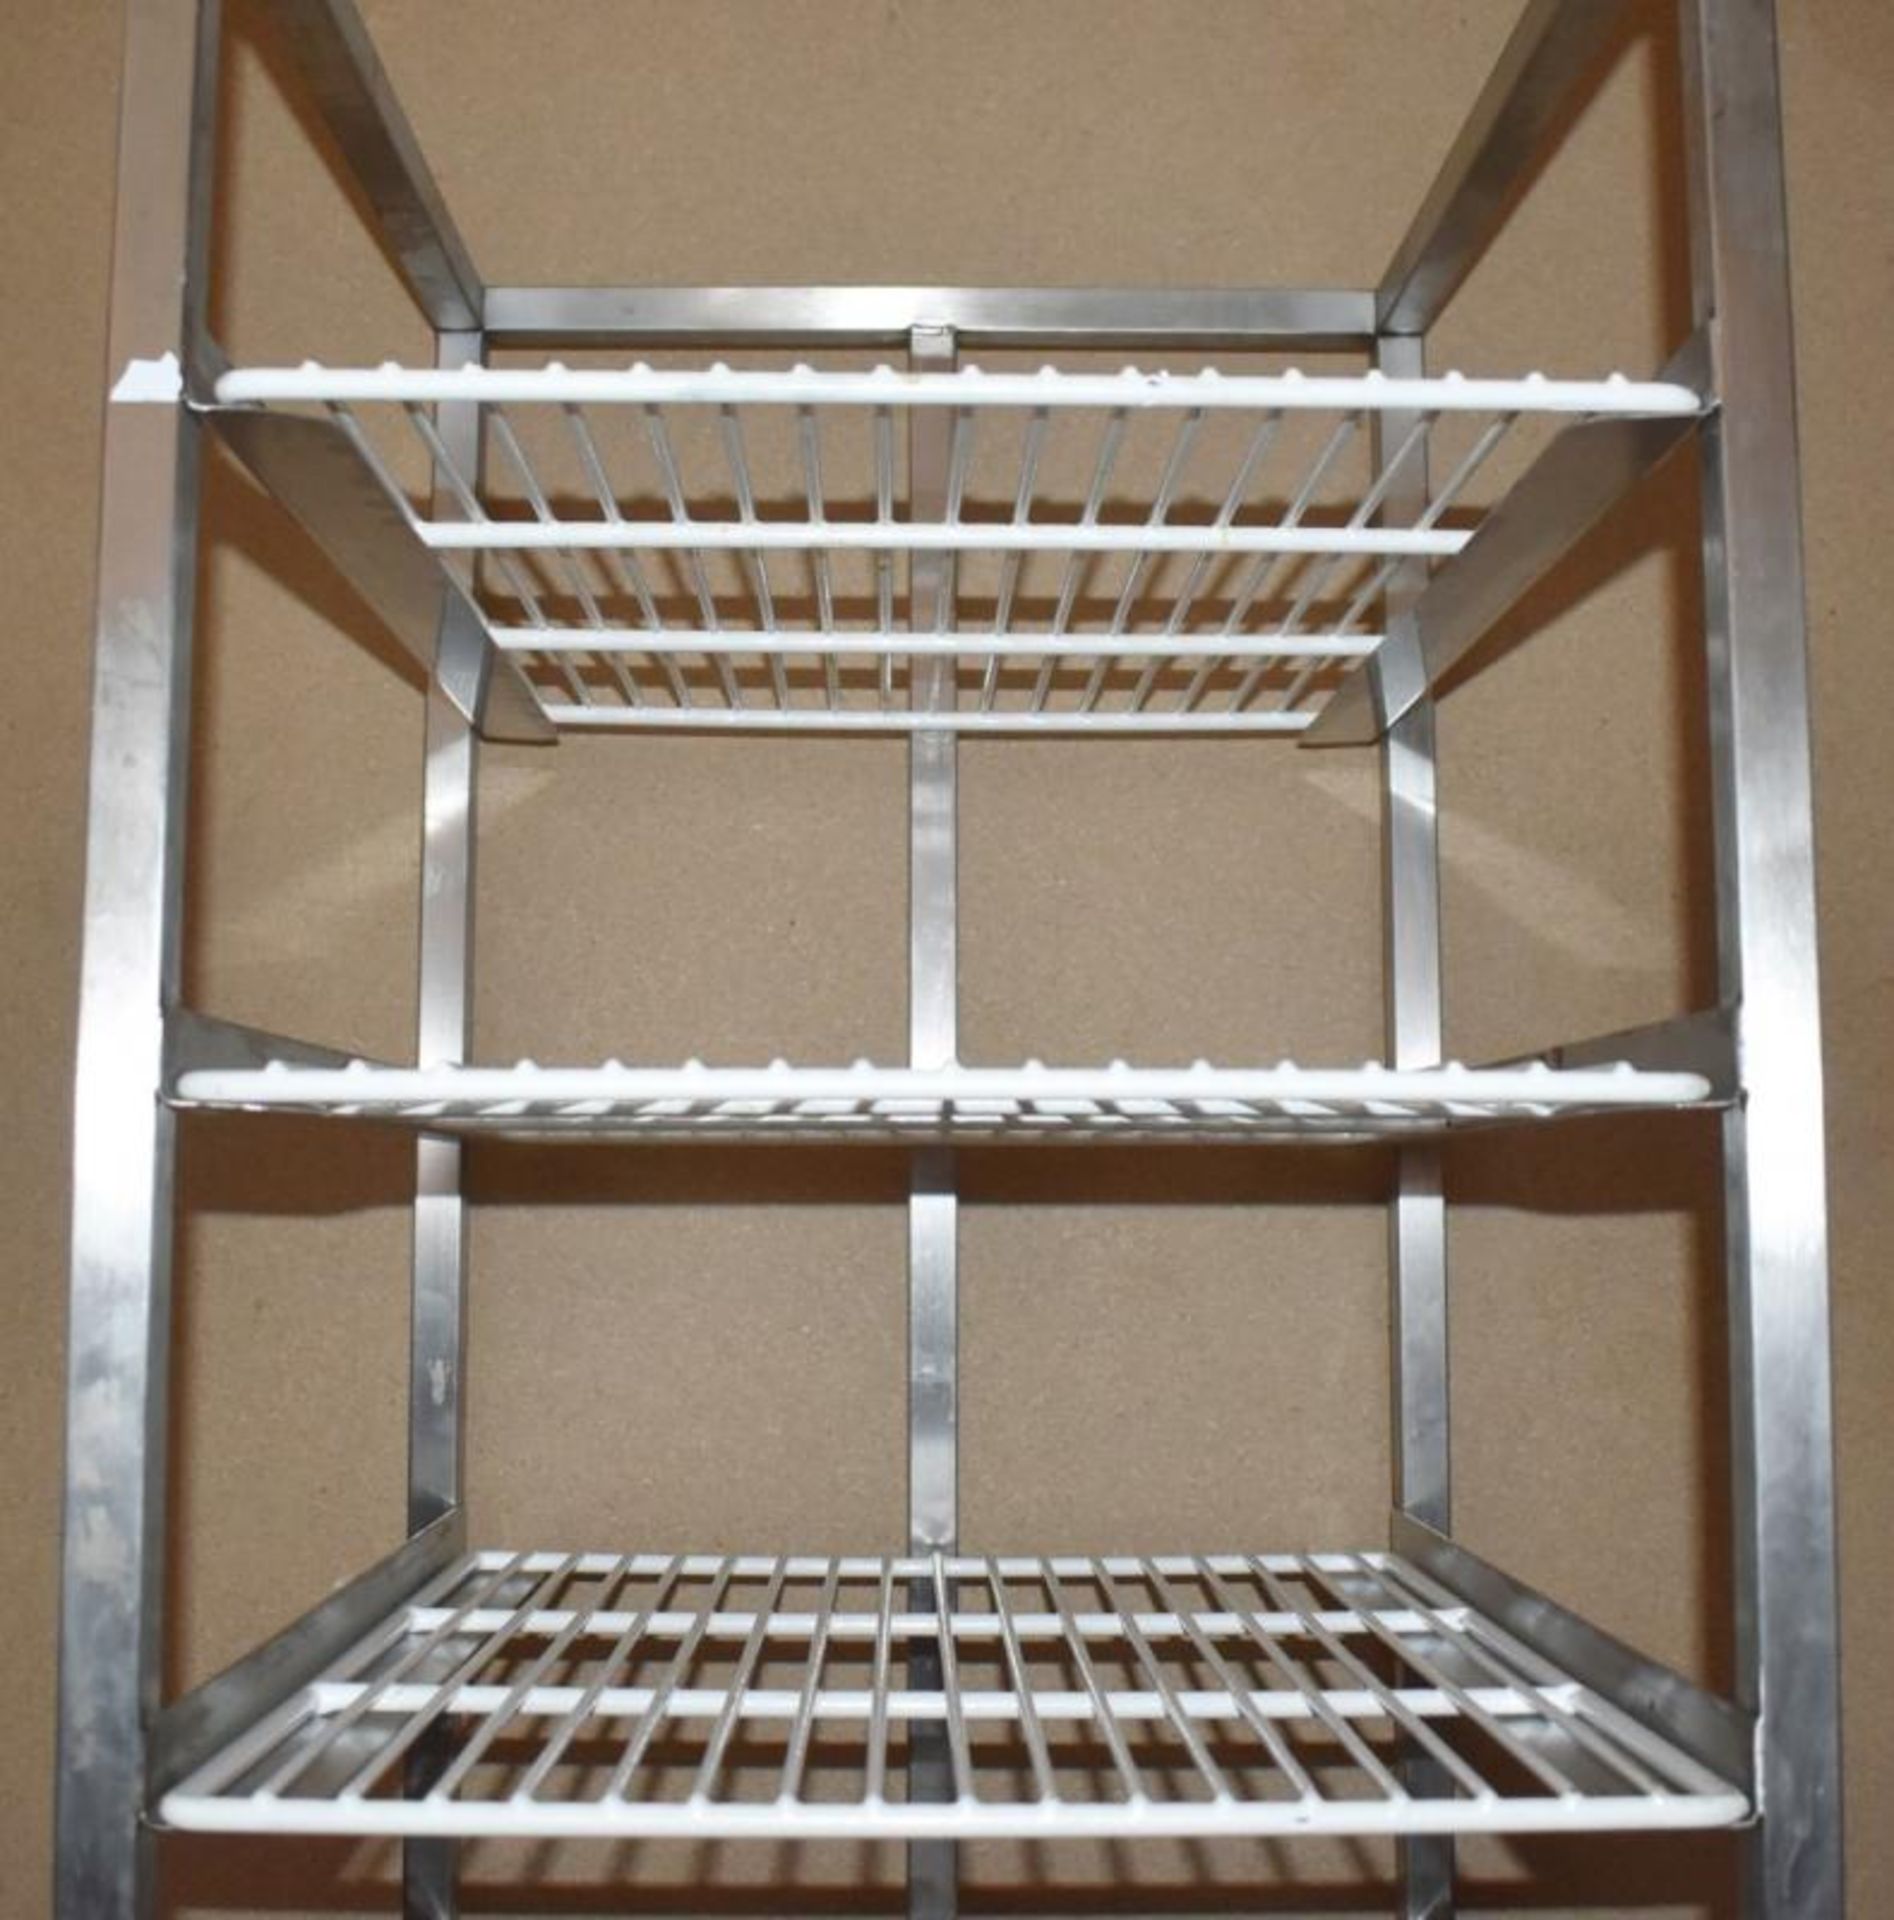 1 x Stainless Steel 8 Tier Mobile Shelf Unit For Commercial Kitchens With White Coated Wire Shelves - Image 4 of 11